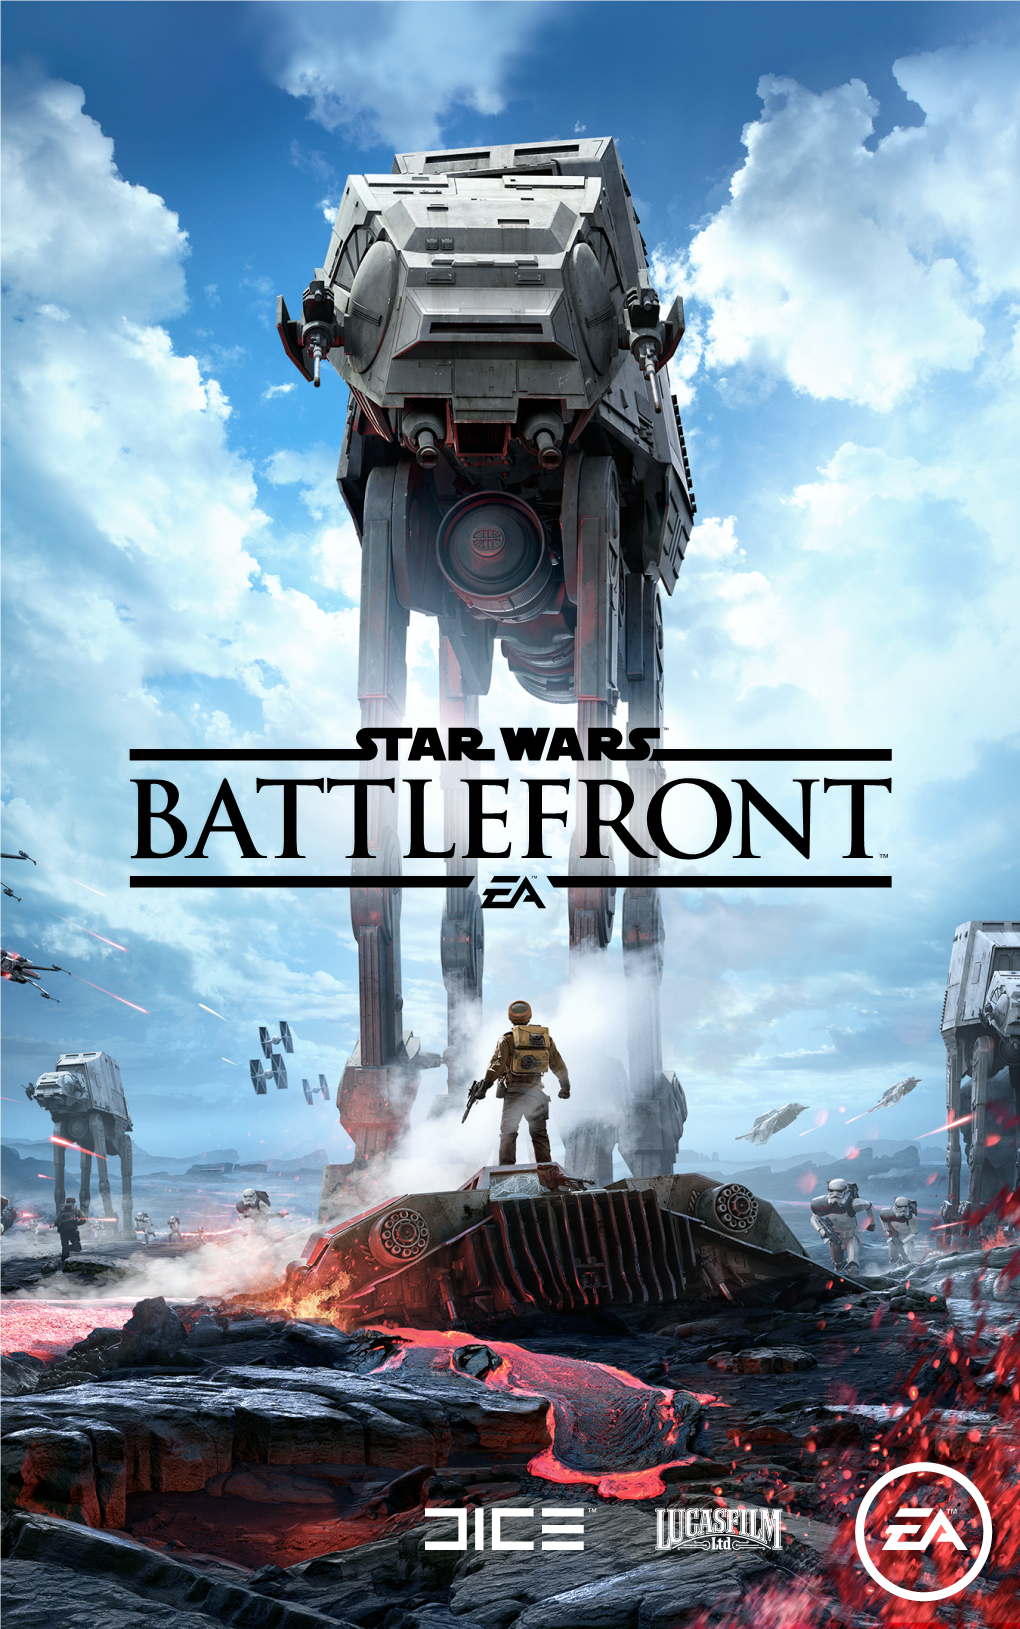 Star Wars Battlefront on PC Allows You to Play the Game on a Variety of Control Devices